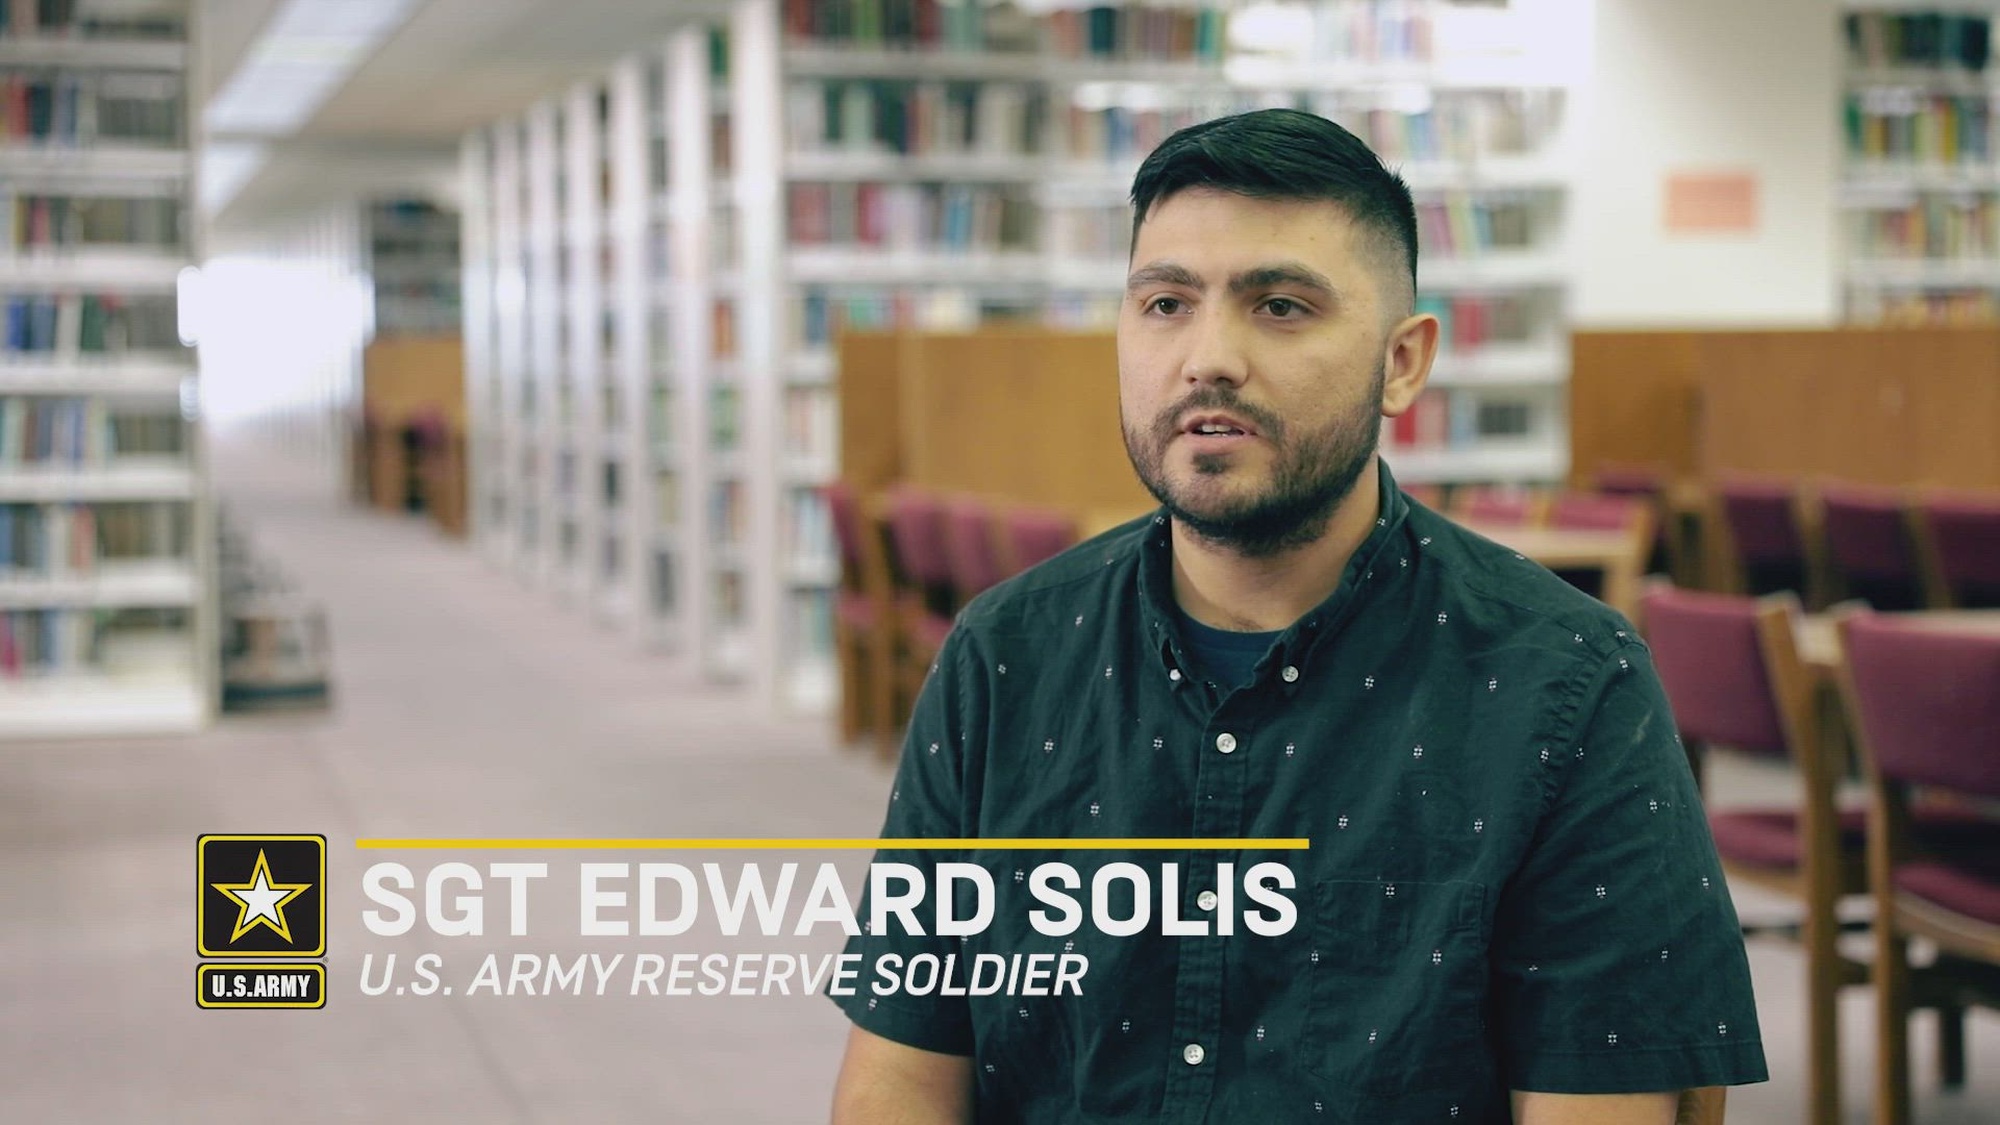 SGT Edward Solis pursues his civilian career, while still serving in the U.S. Army Reserve. After his time on Active Duty, Ed learned about the benefits of the Army Reserve during his time in the Inactive Ready Reserve (IRR). 

With more flexibility in the Reserve, Ed experiences the best of both worlds.

Video By Tim Yao